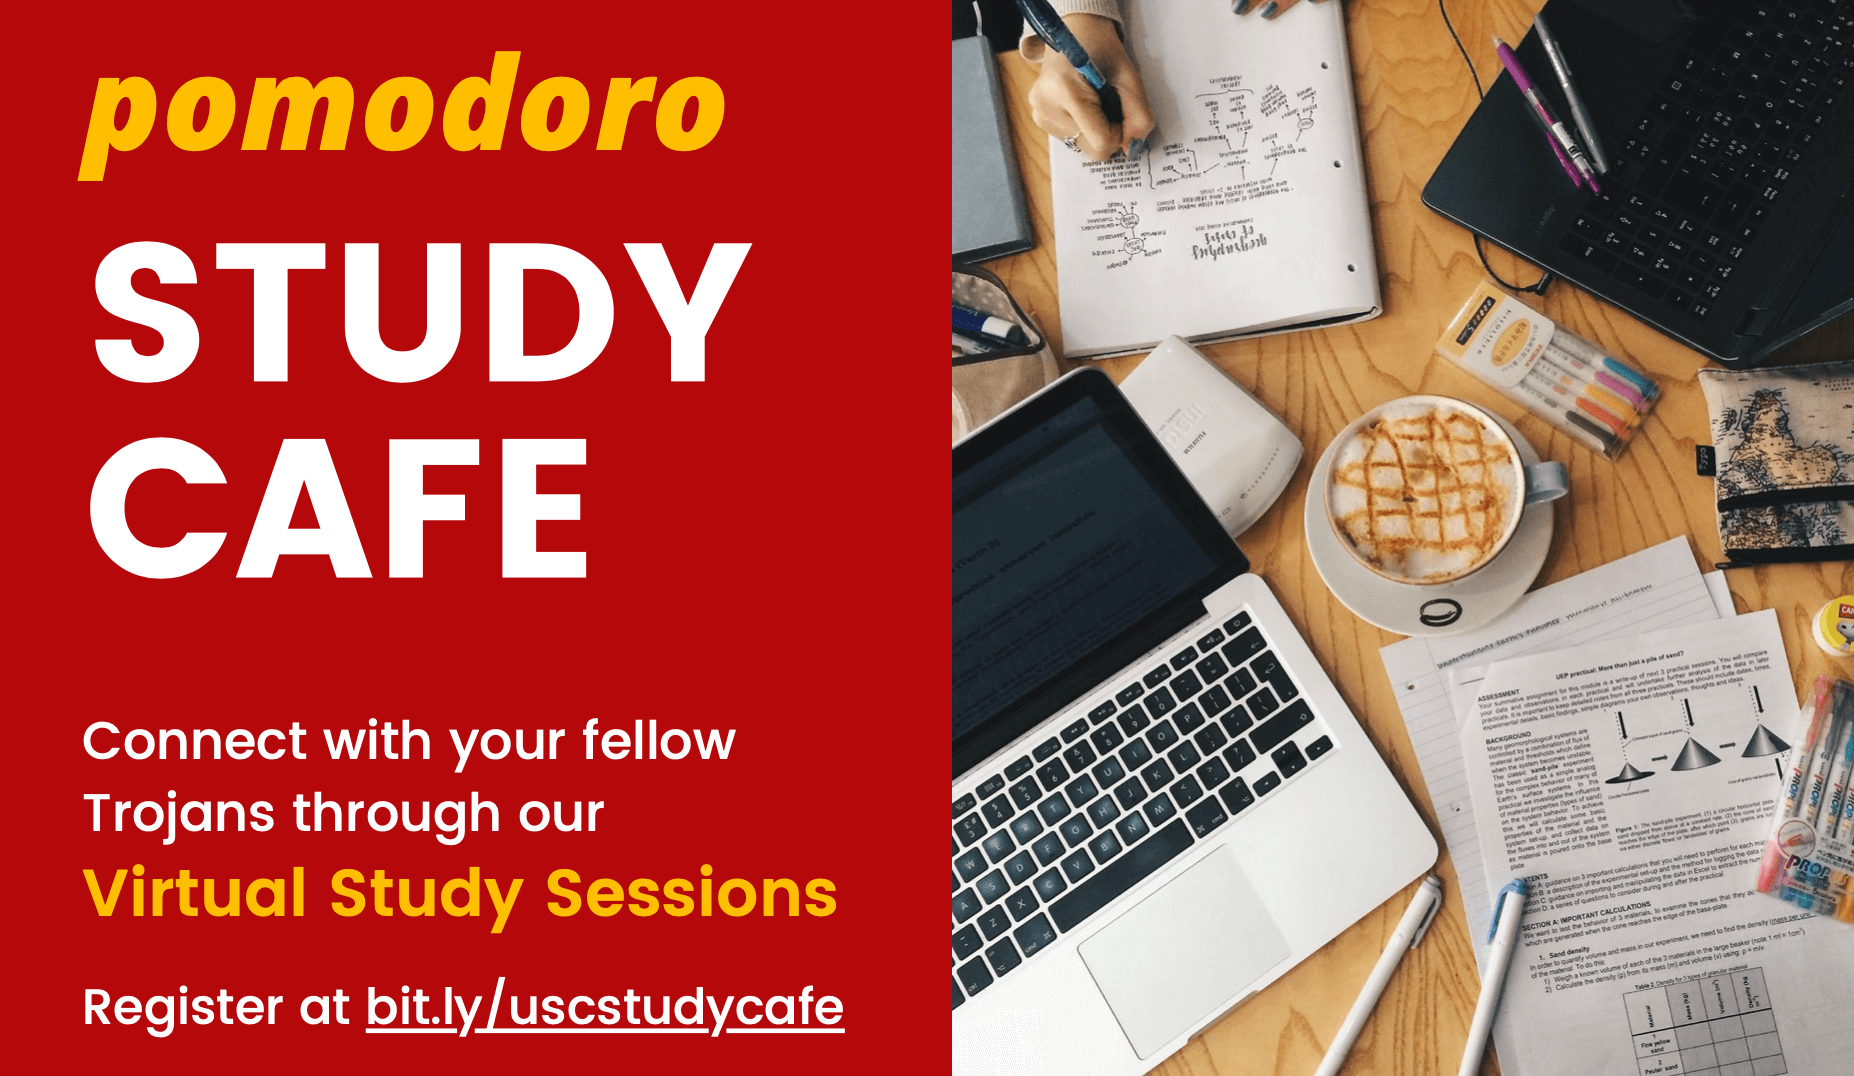 Featured image for “Pomodoro Study Cafe”